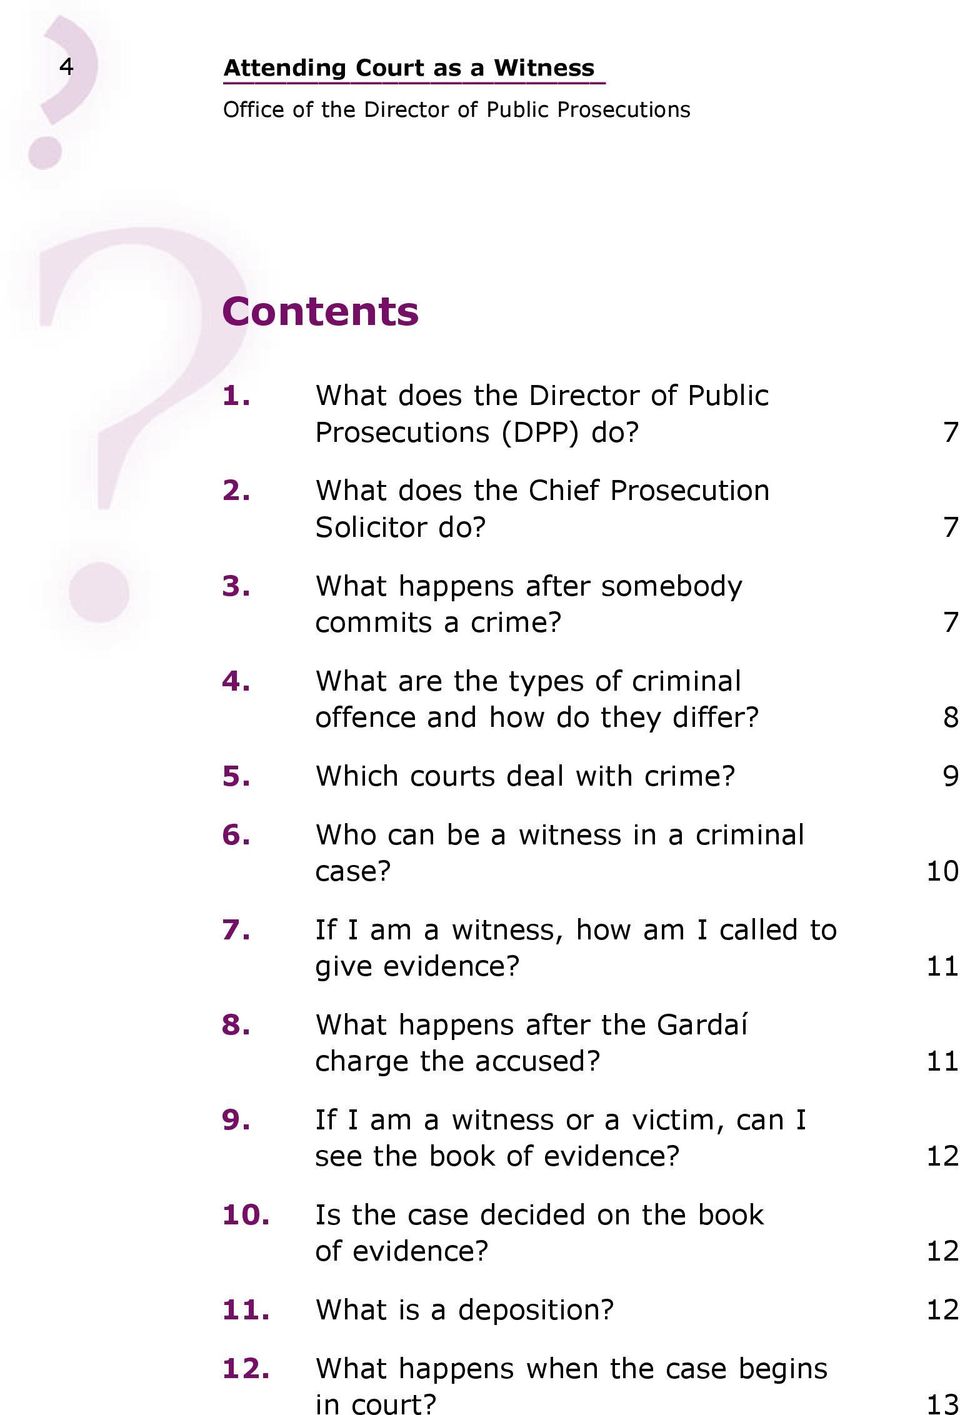 Who can be a witness in a criminal case?1 7. If I am a witness, how am I called to give evidence?1 8. What happens after the Gardaí charge the accused?1 9.